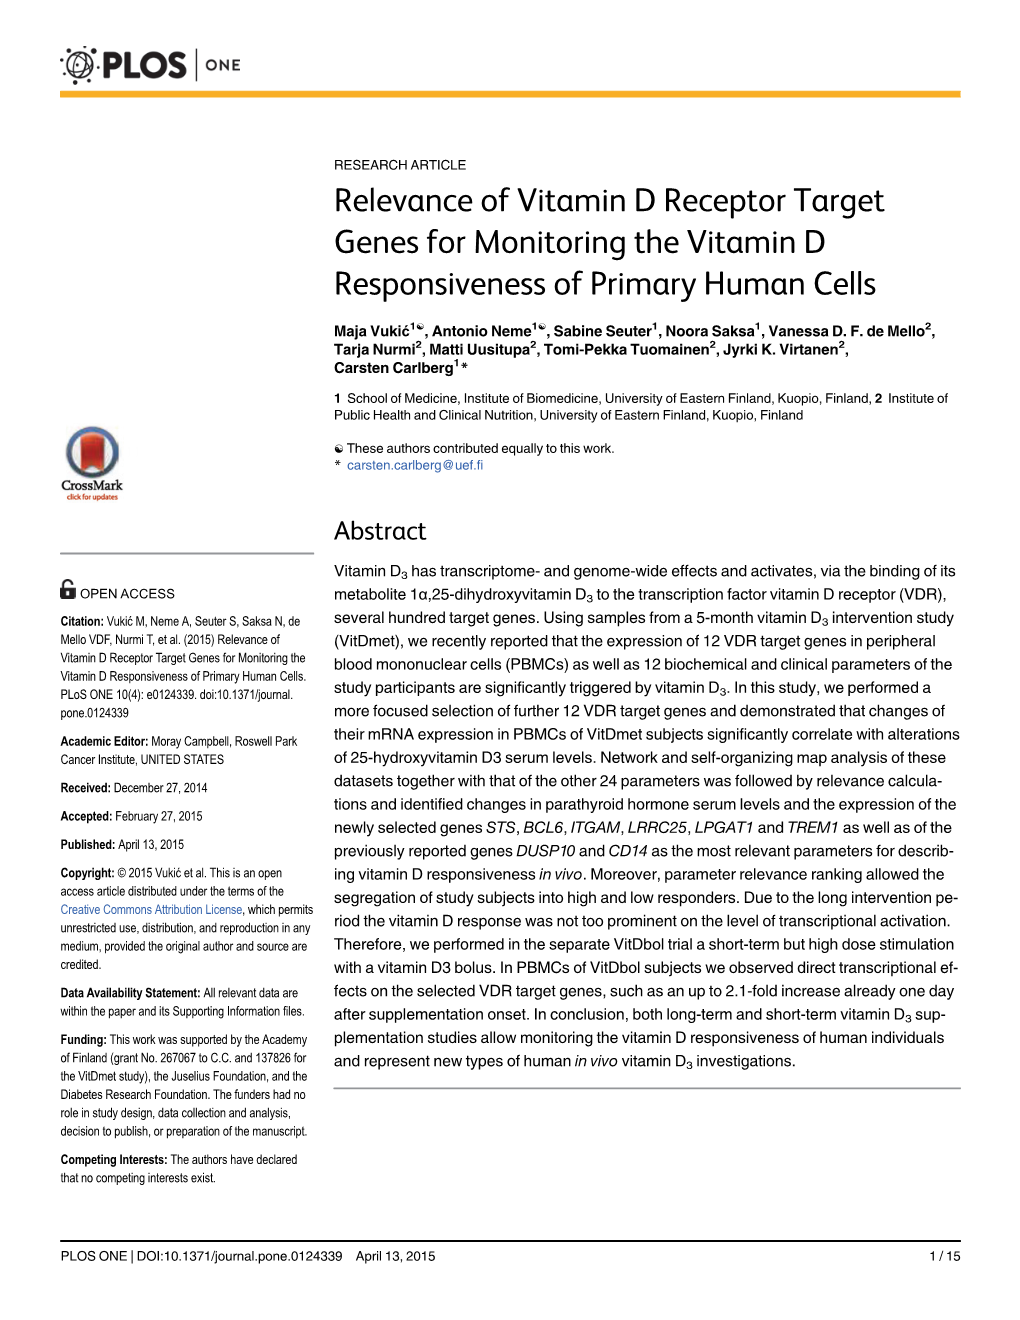 Relevance of Vitamin D Receptor Target Genes for Monitoring the Vitamin D Responsiveness of Primary Human Cells